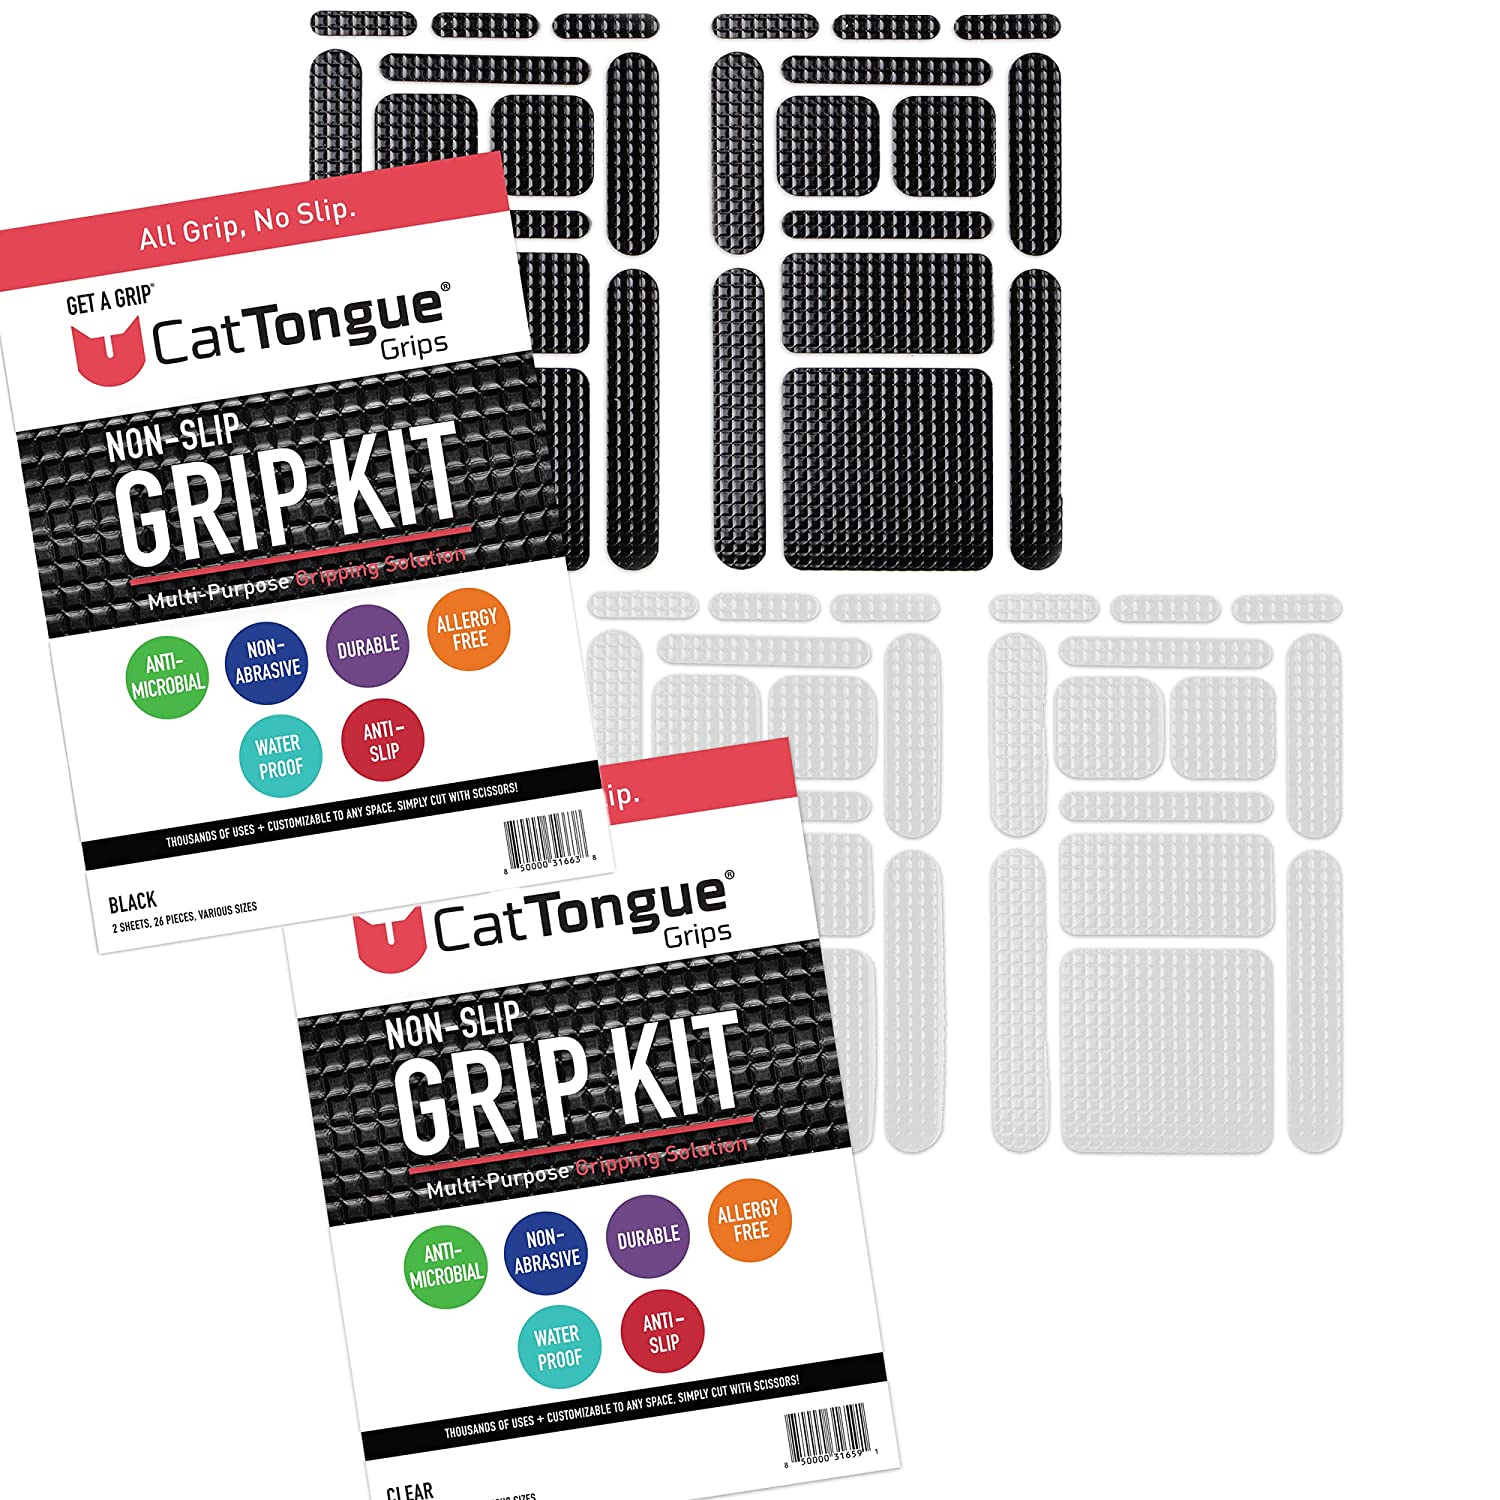 Non-Abrasive Grip Kit – CatTongue Grips